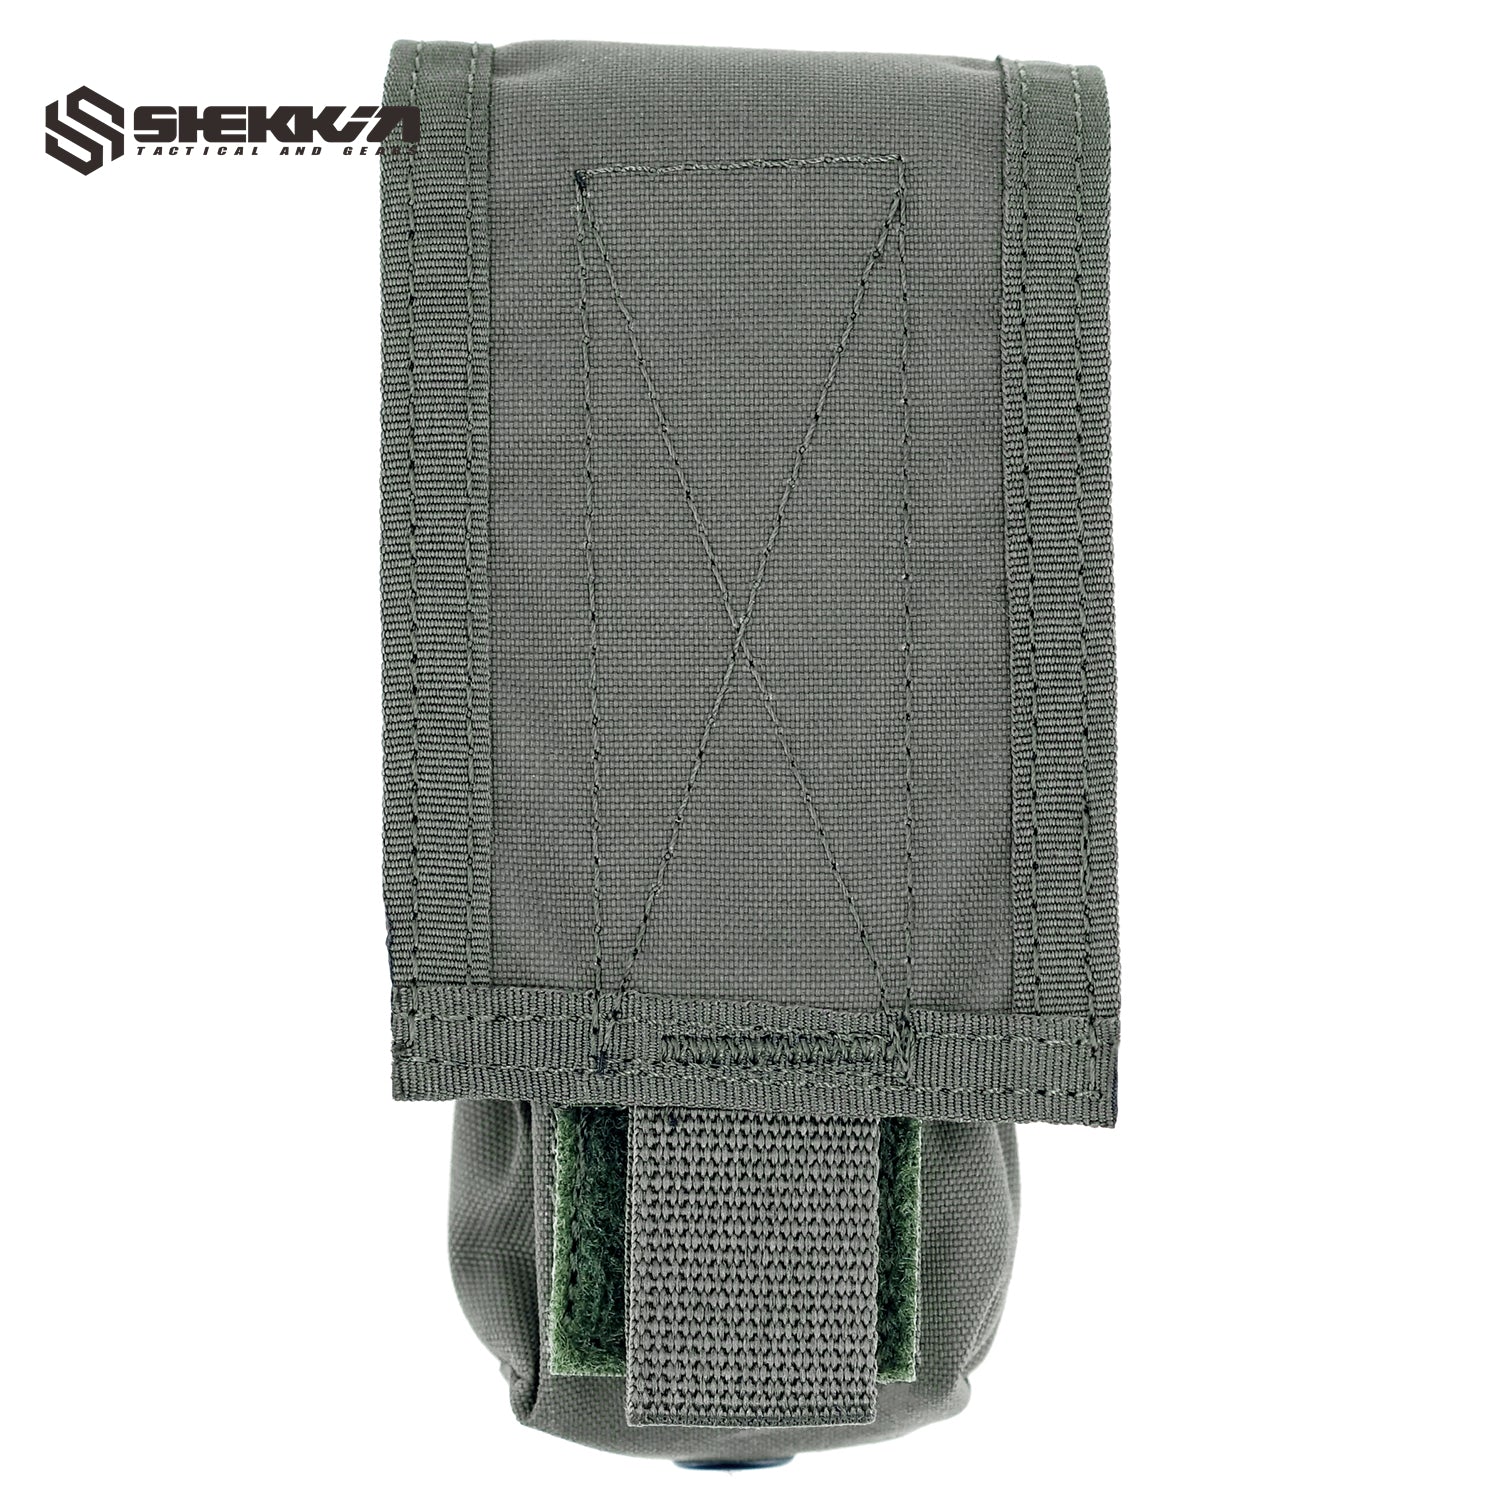 Pre MSA Paraclete style Smoke green single flash bang pouch with round & square flap - Shekkin Gears